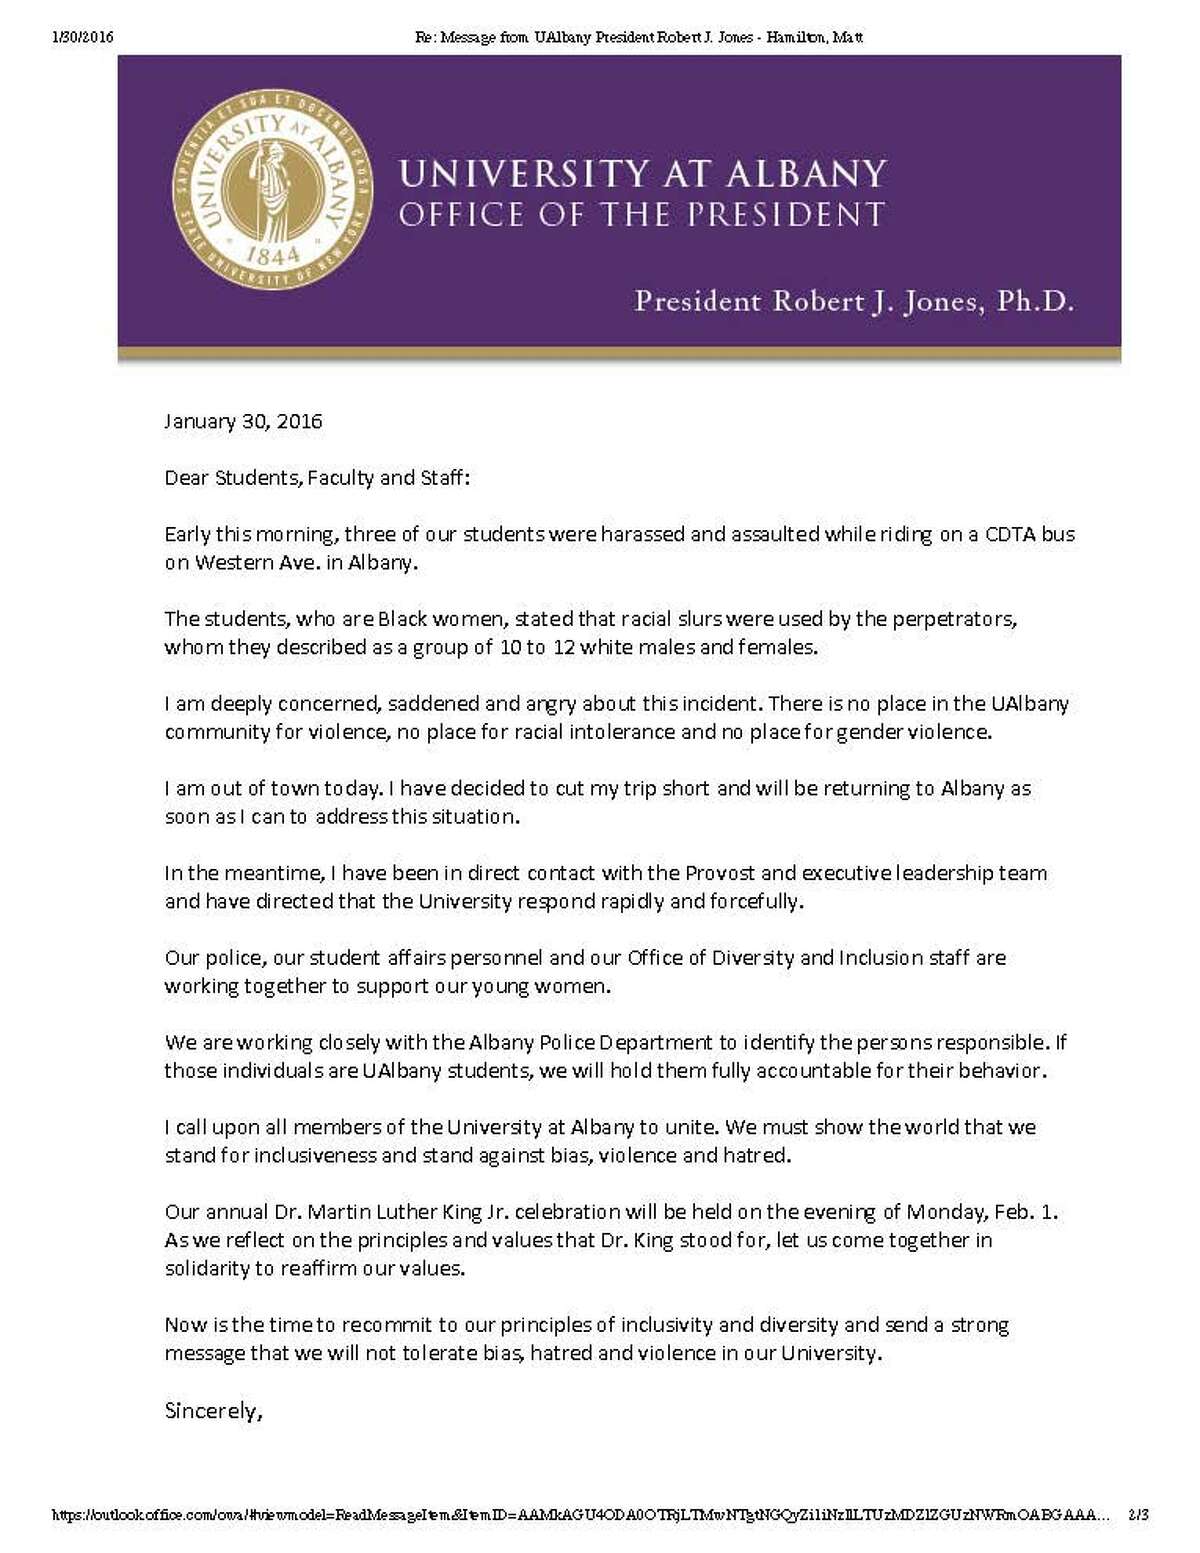 University at Albany President Robert Jones sent this letter to the campus community on Saturday, Jan. 30, 2016, following an overnight incident in which three UAlbany students who are black say they were assaultled by a group of white students on a CDTA bus near campus.